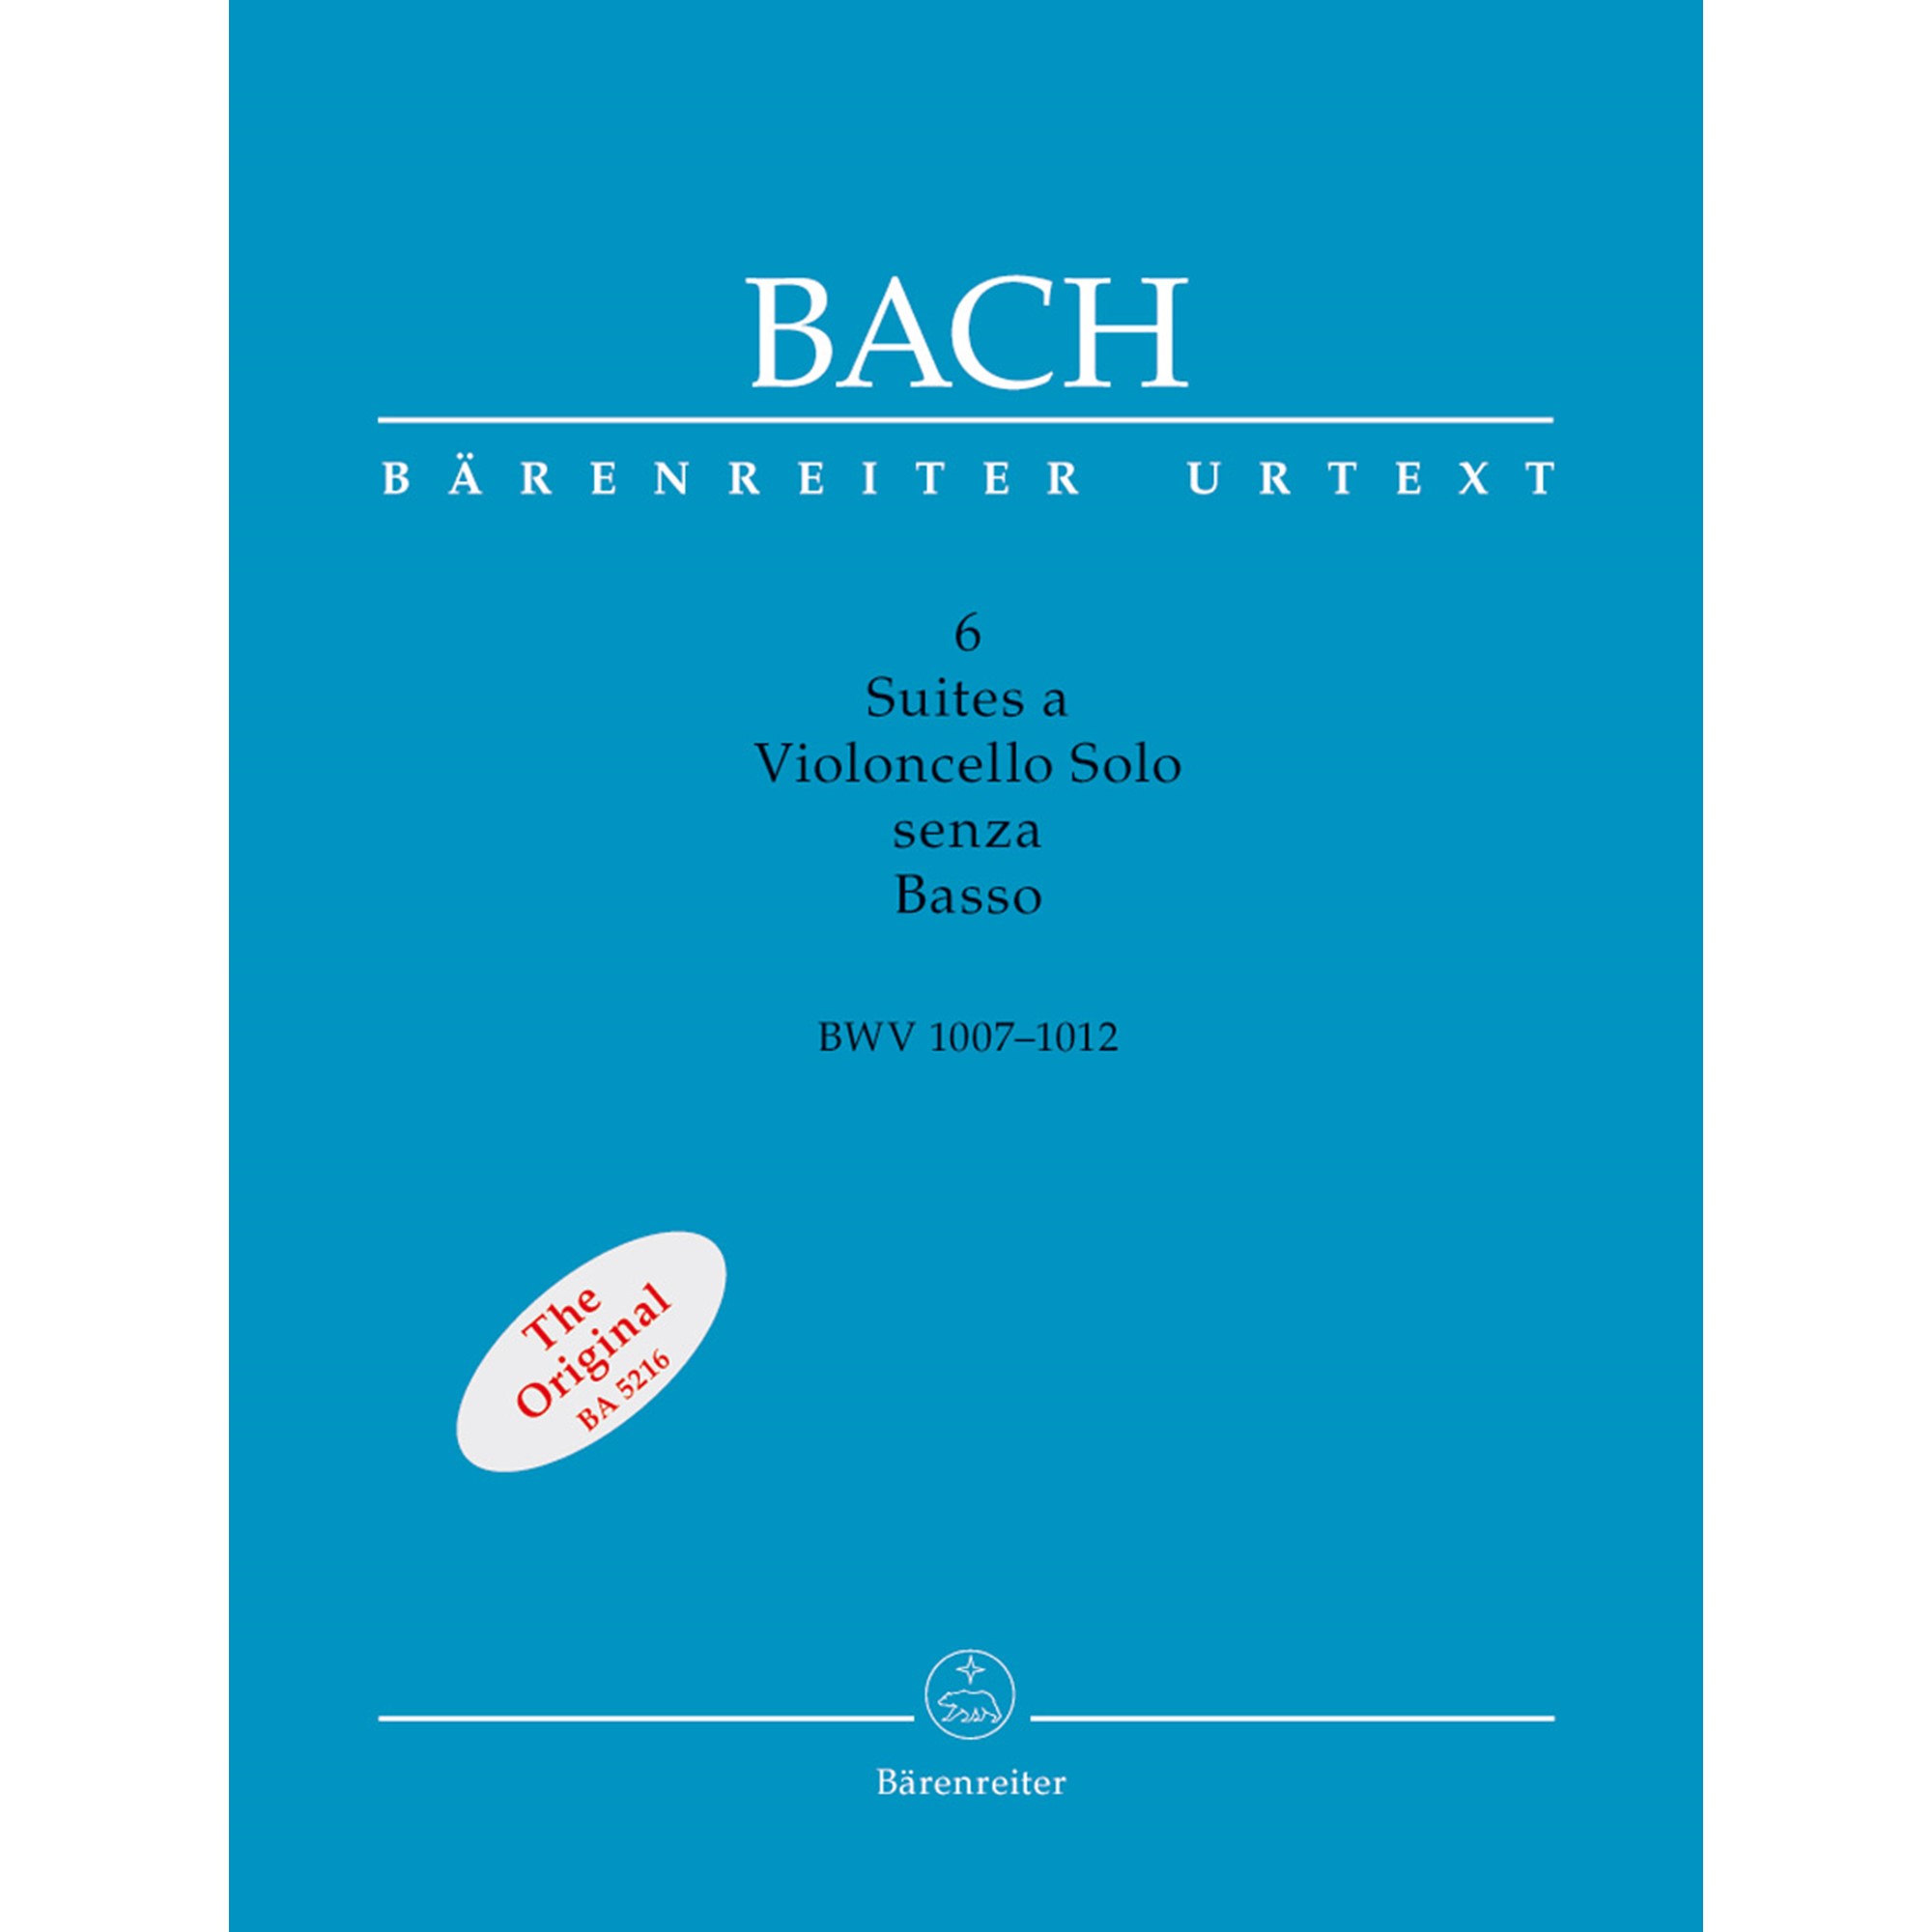 LIBROS BAR0285 SIX SUITES FOR VIOLONCHELO BWV BACH